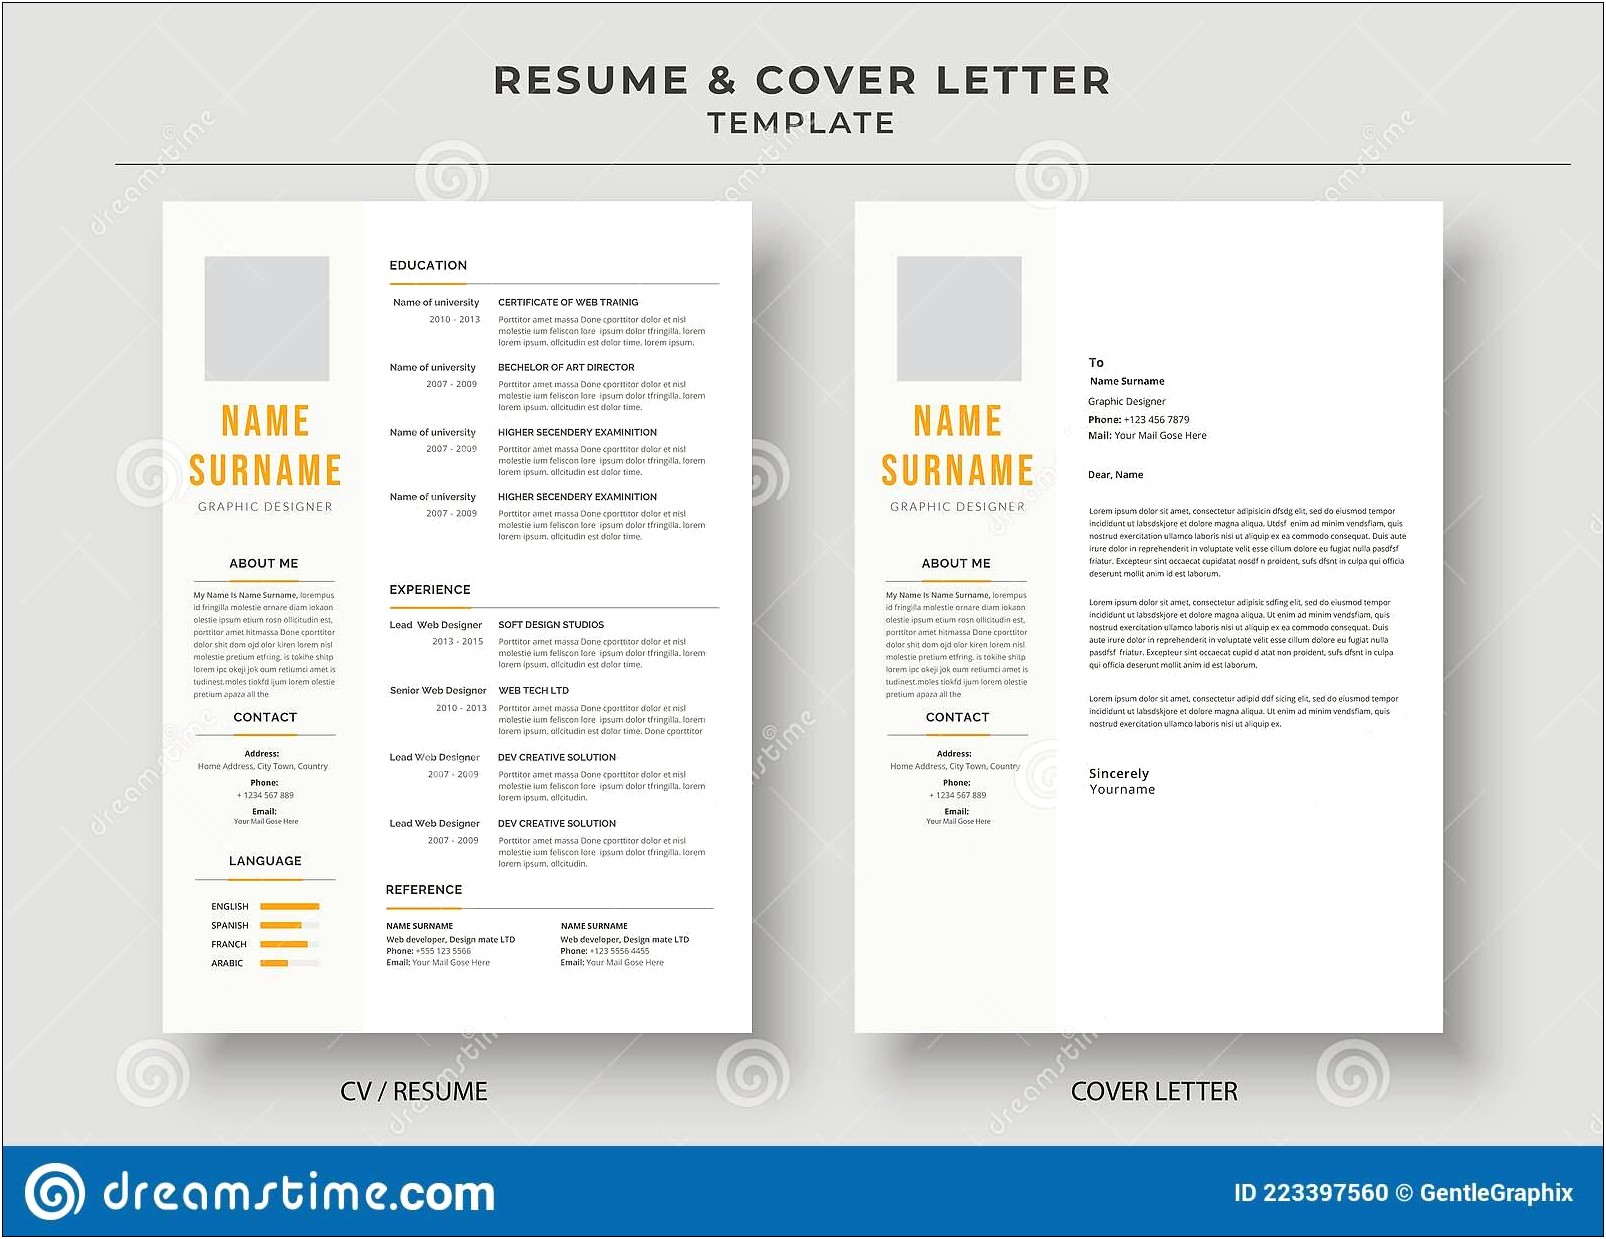 Email Or Mail Resume And Cover Letter